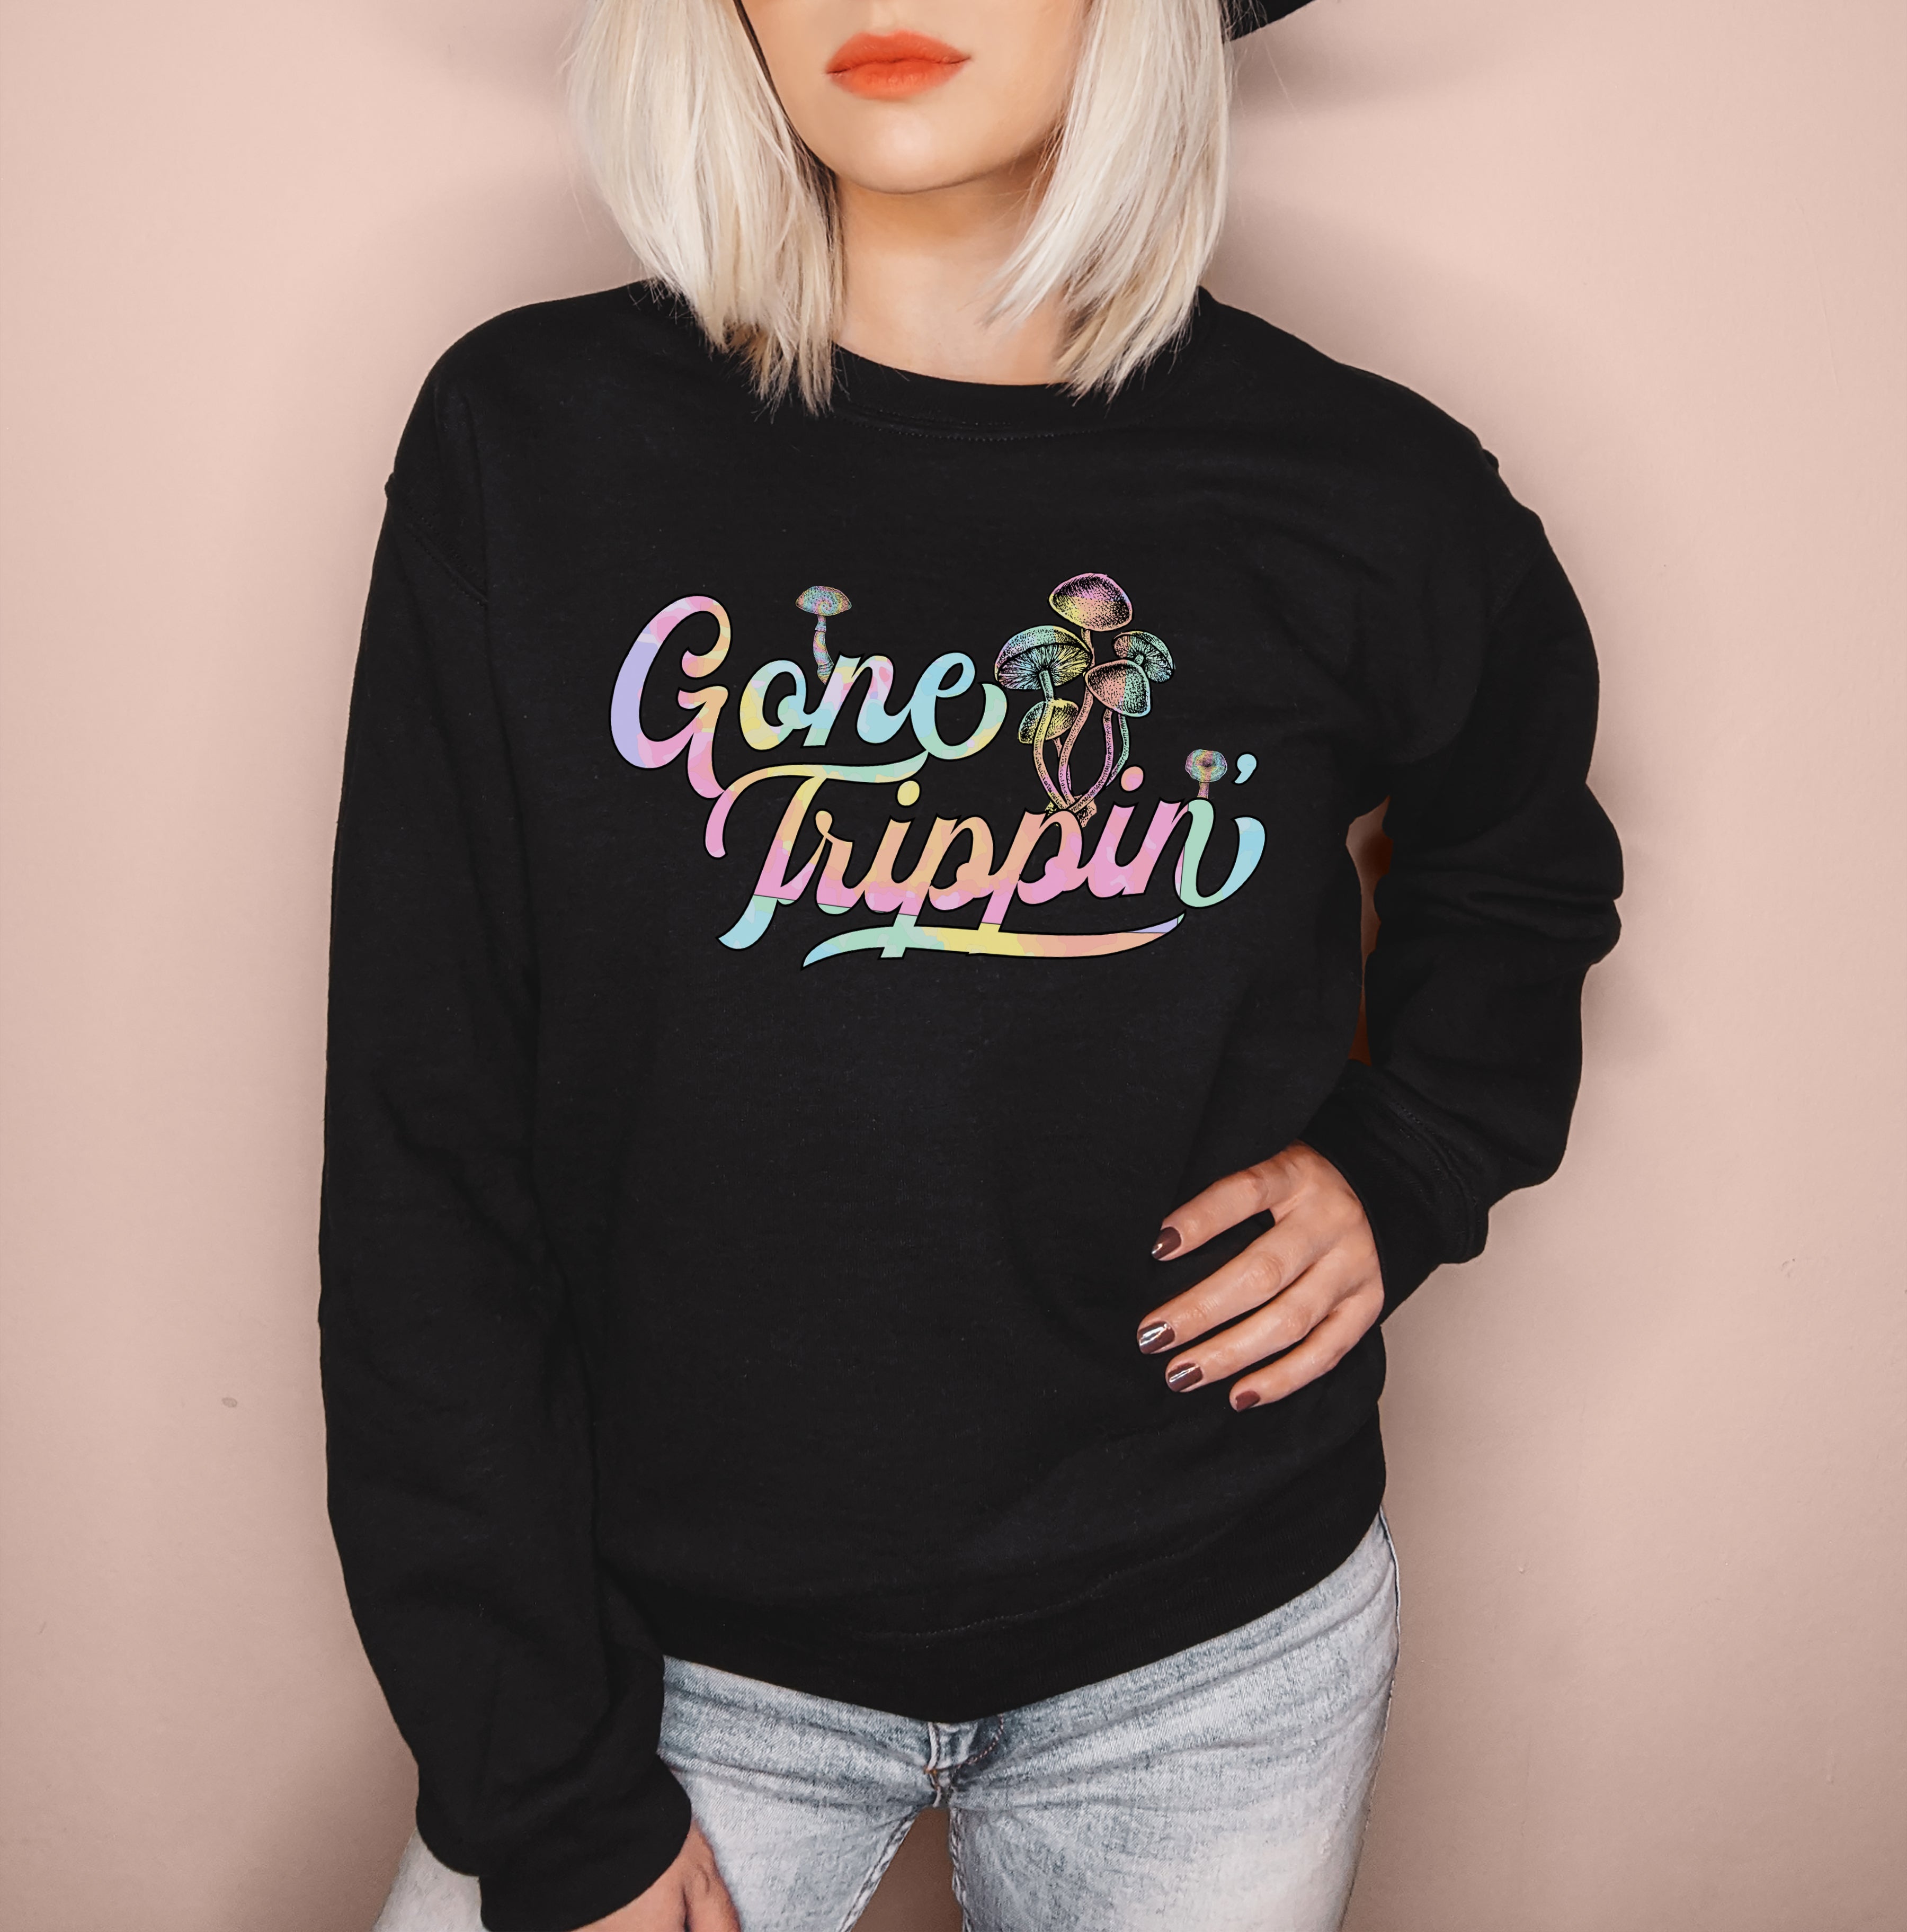 Black sweatshirt with psychedelic mushrooms that says gone trippin - HighCiti